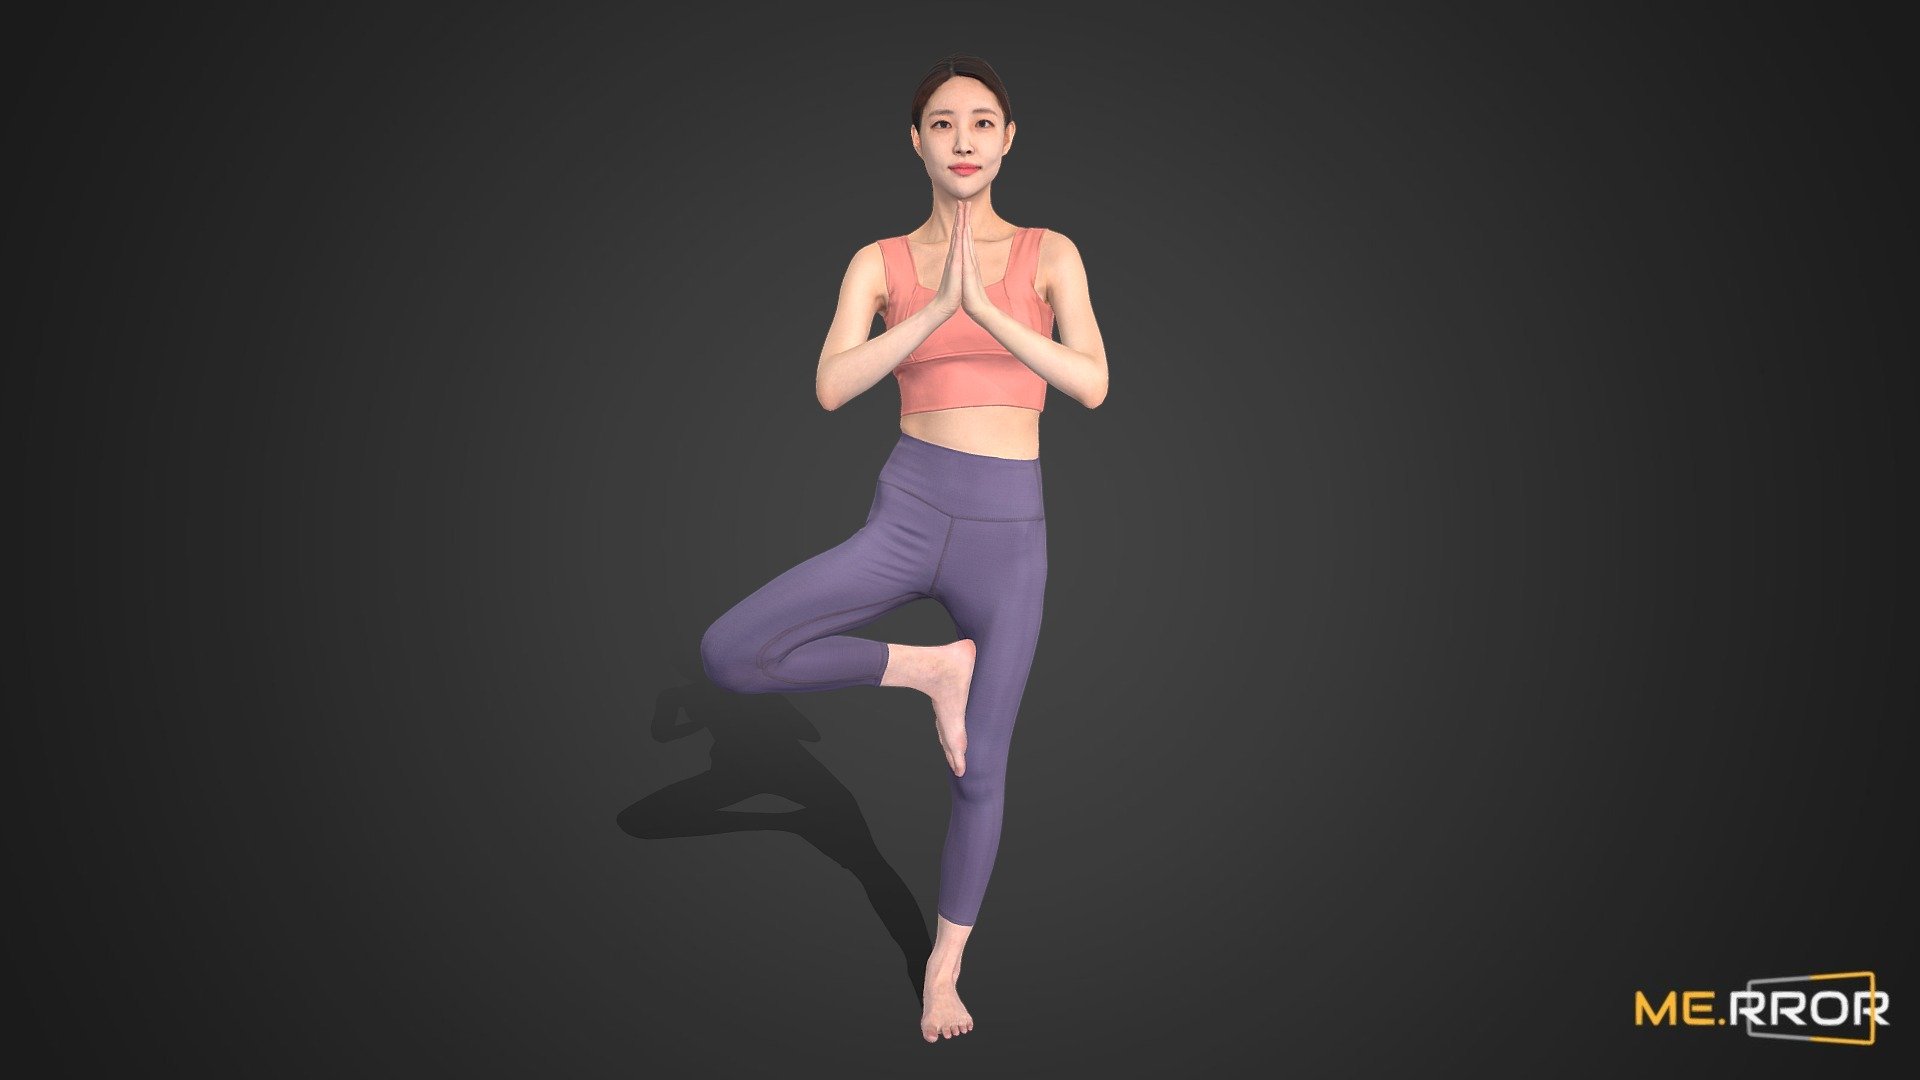 ME.RROR


From 3D models of Asian individuals to a fresh selection of free assets available each month - explore a richer diversity of photorealistic 3D assets at the ME.RROR asset store!

https://me-rror.com/store




[Model Info]




Model Formats : FBX, MAX


Texture Maps (8K) : Diffuse, Normal




Find Scanned - 2M poly version here: https://sketchfab.com/3d-models/8a4d52bea43f4fe88b74c35d87948415



If you encounter any problems using this model, please feel free to contact us. We'd be glad to help you.



[About ME.RROR]

Step into the future with ME.RROR, South Korea's leading 3D specialist. Bespoke creations are not just possible; they are our specialty.

Service areas:




3D scanning

3D modeling

Virtual human creation

Inquiries: https://merror.channel.io/lounge - [Game-Ready] Asian Woman Scan_Posed 13 - Buy Royalty Free 3D model by ME.RROR (@merror) 3d model